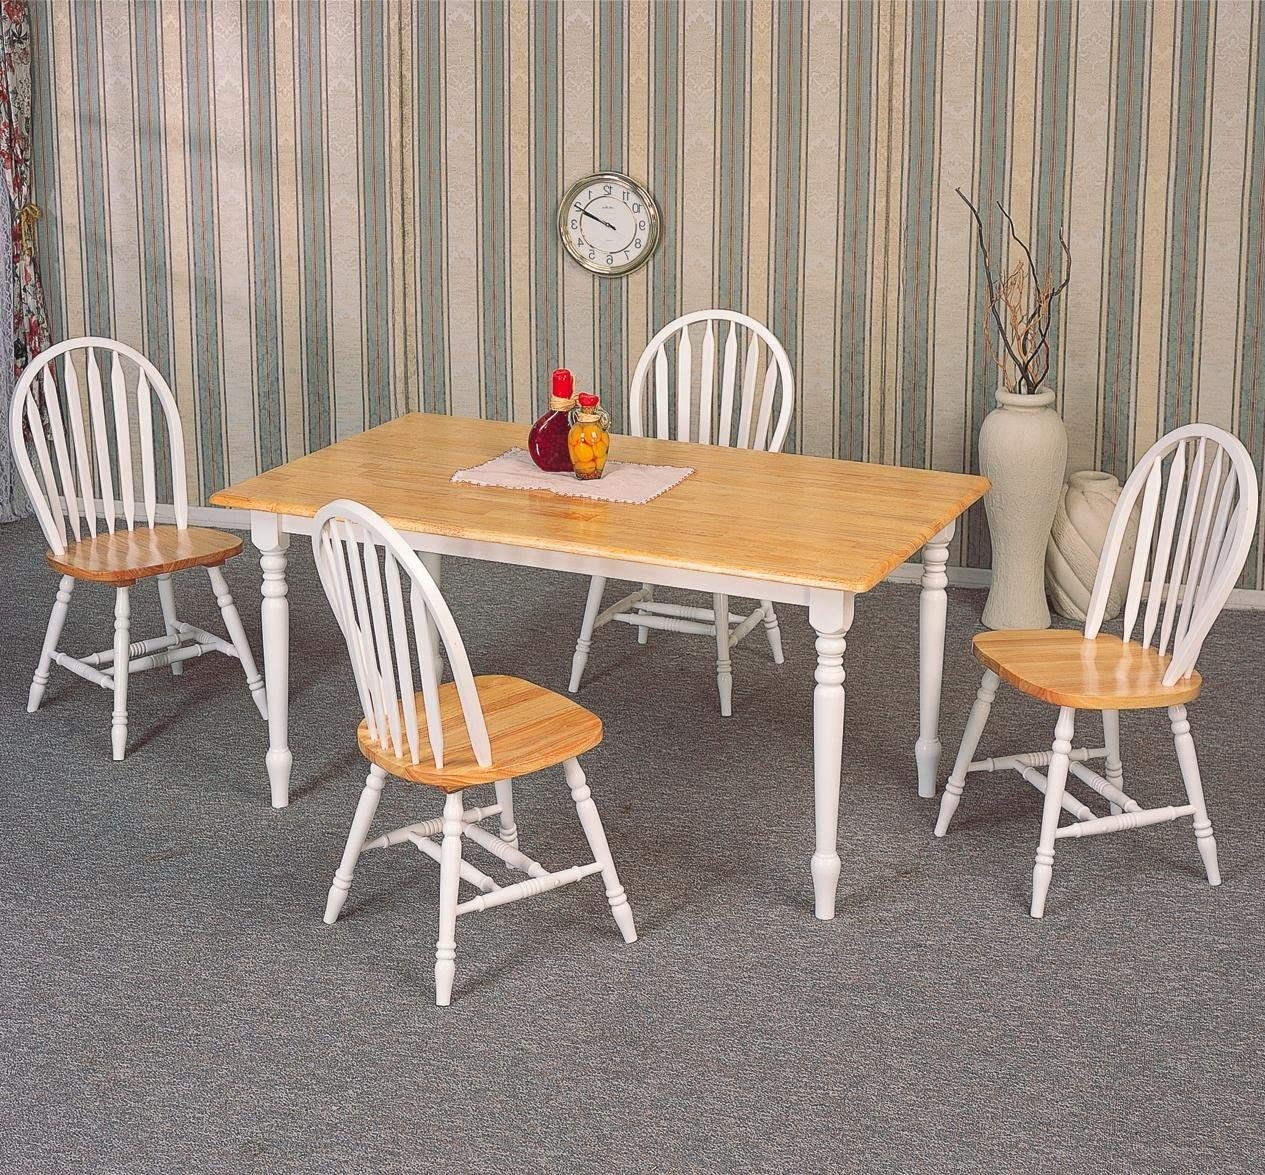 5pc Dining Table & Windsor Chairs Set White & Oak Finish